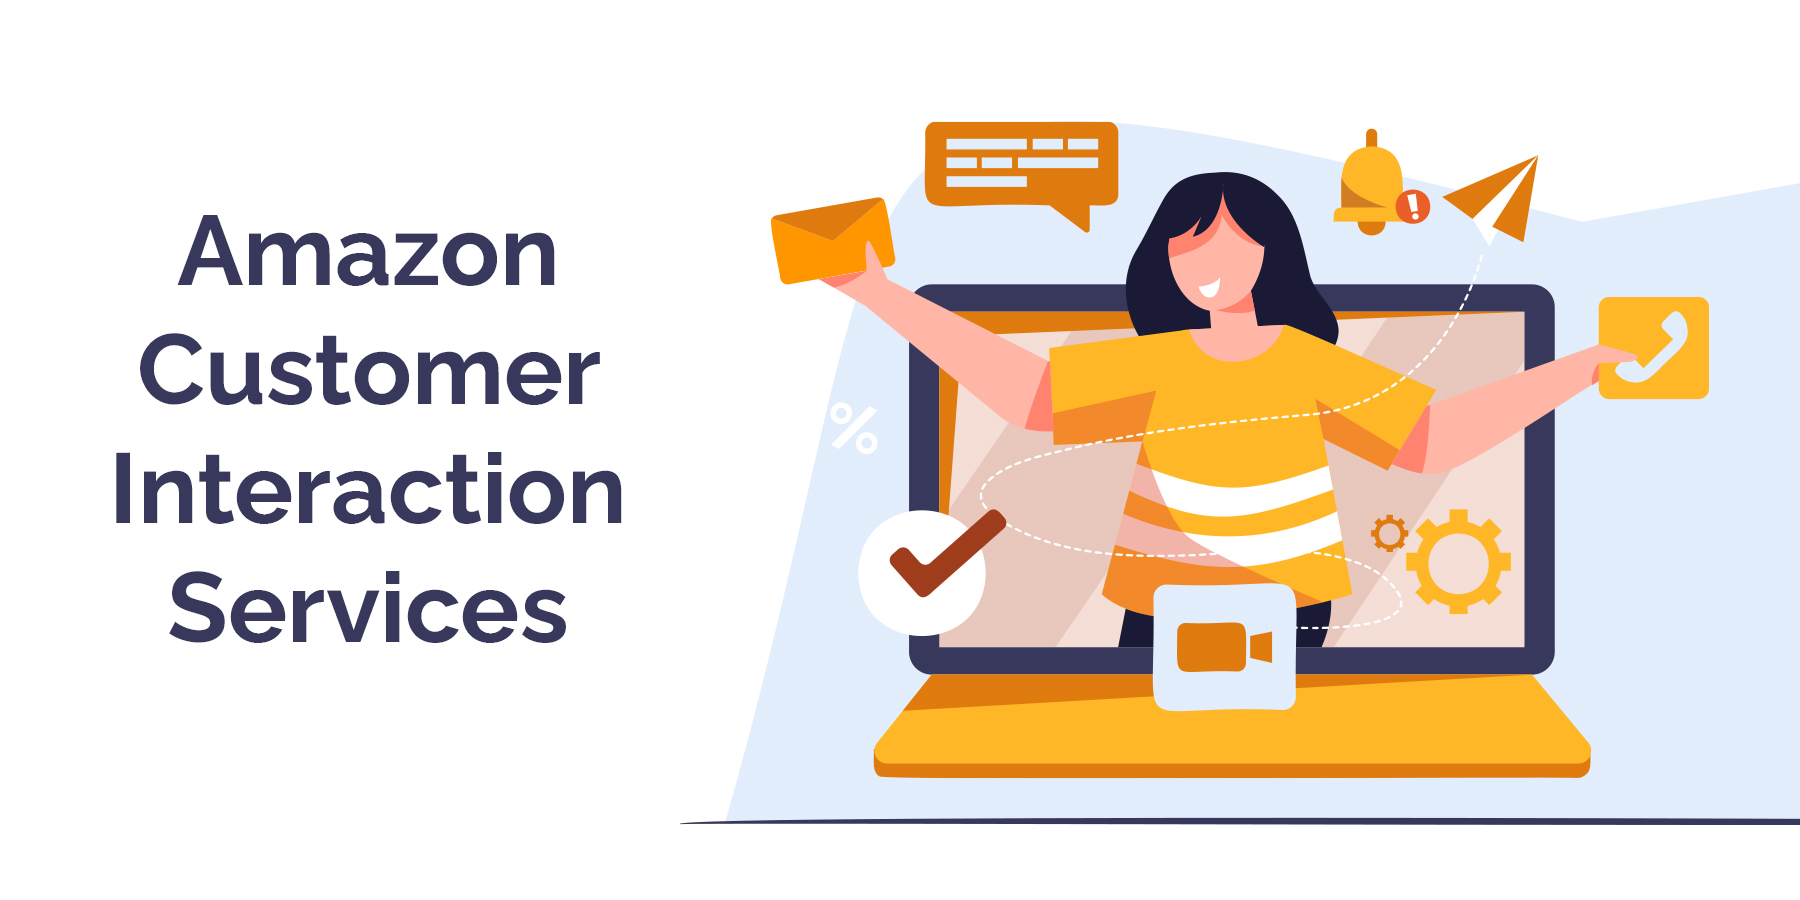 Top 5 Benefits Of Amazon S Customer Interaction Services To Ecommerce Businesses